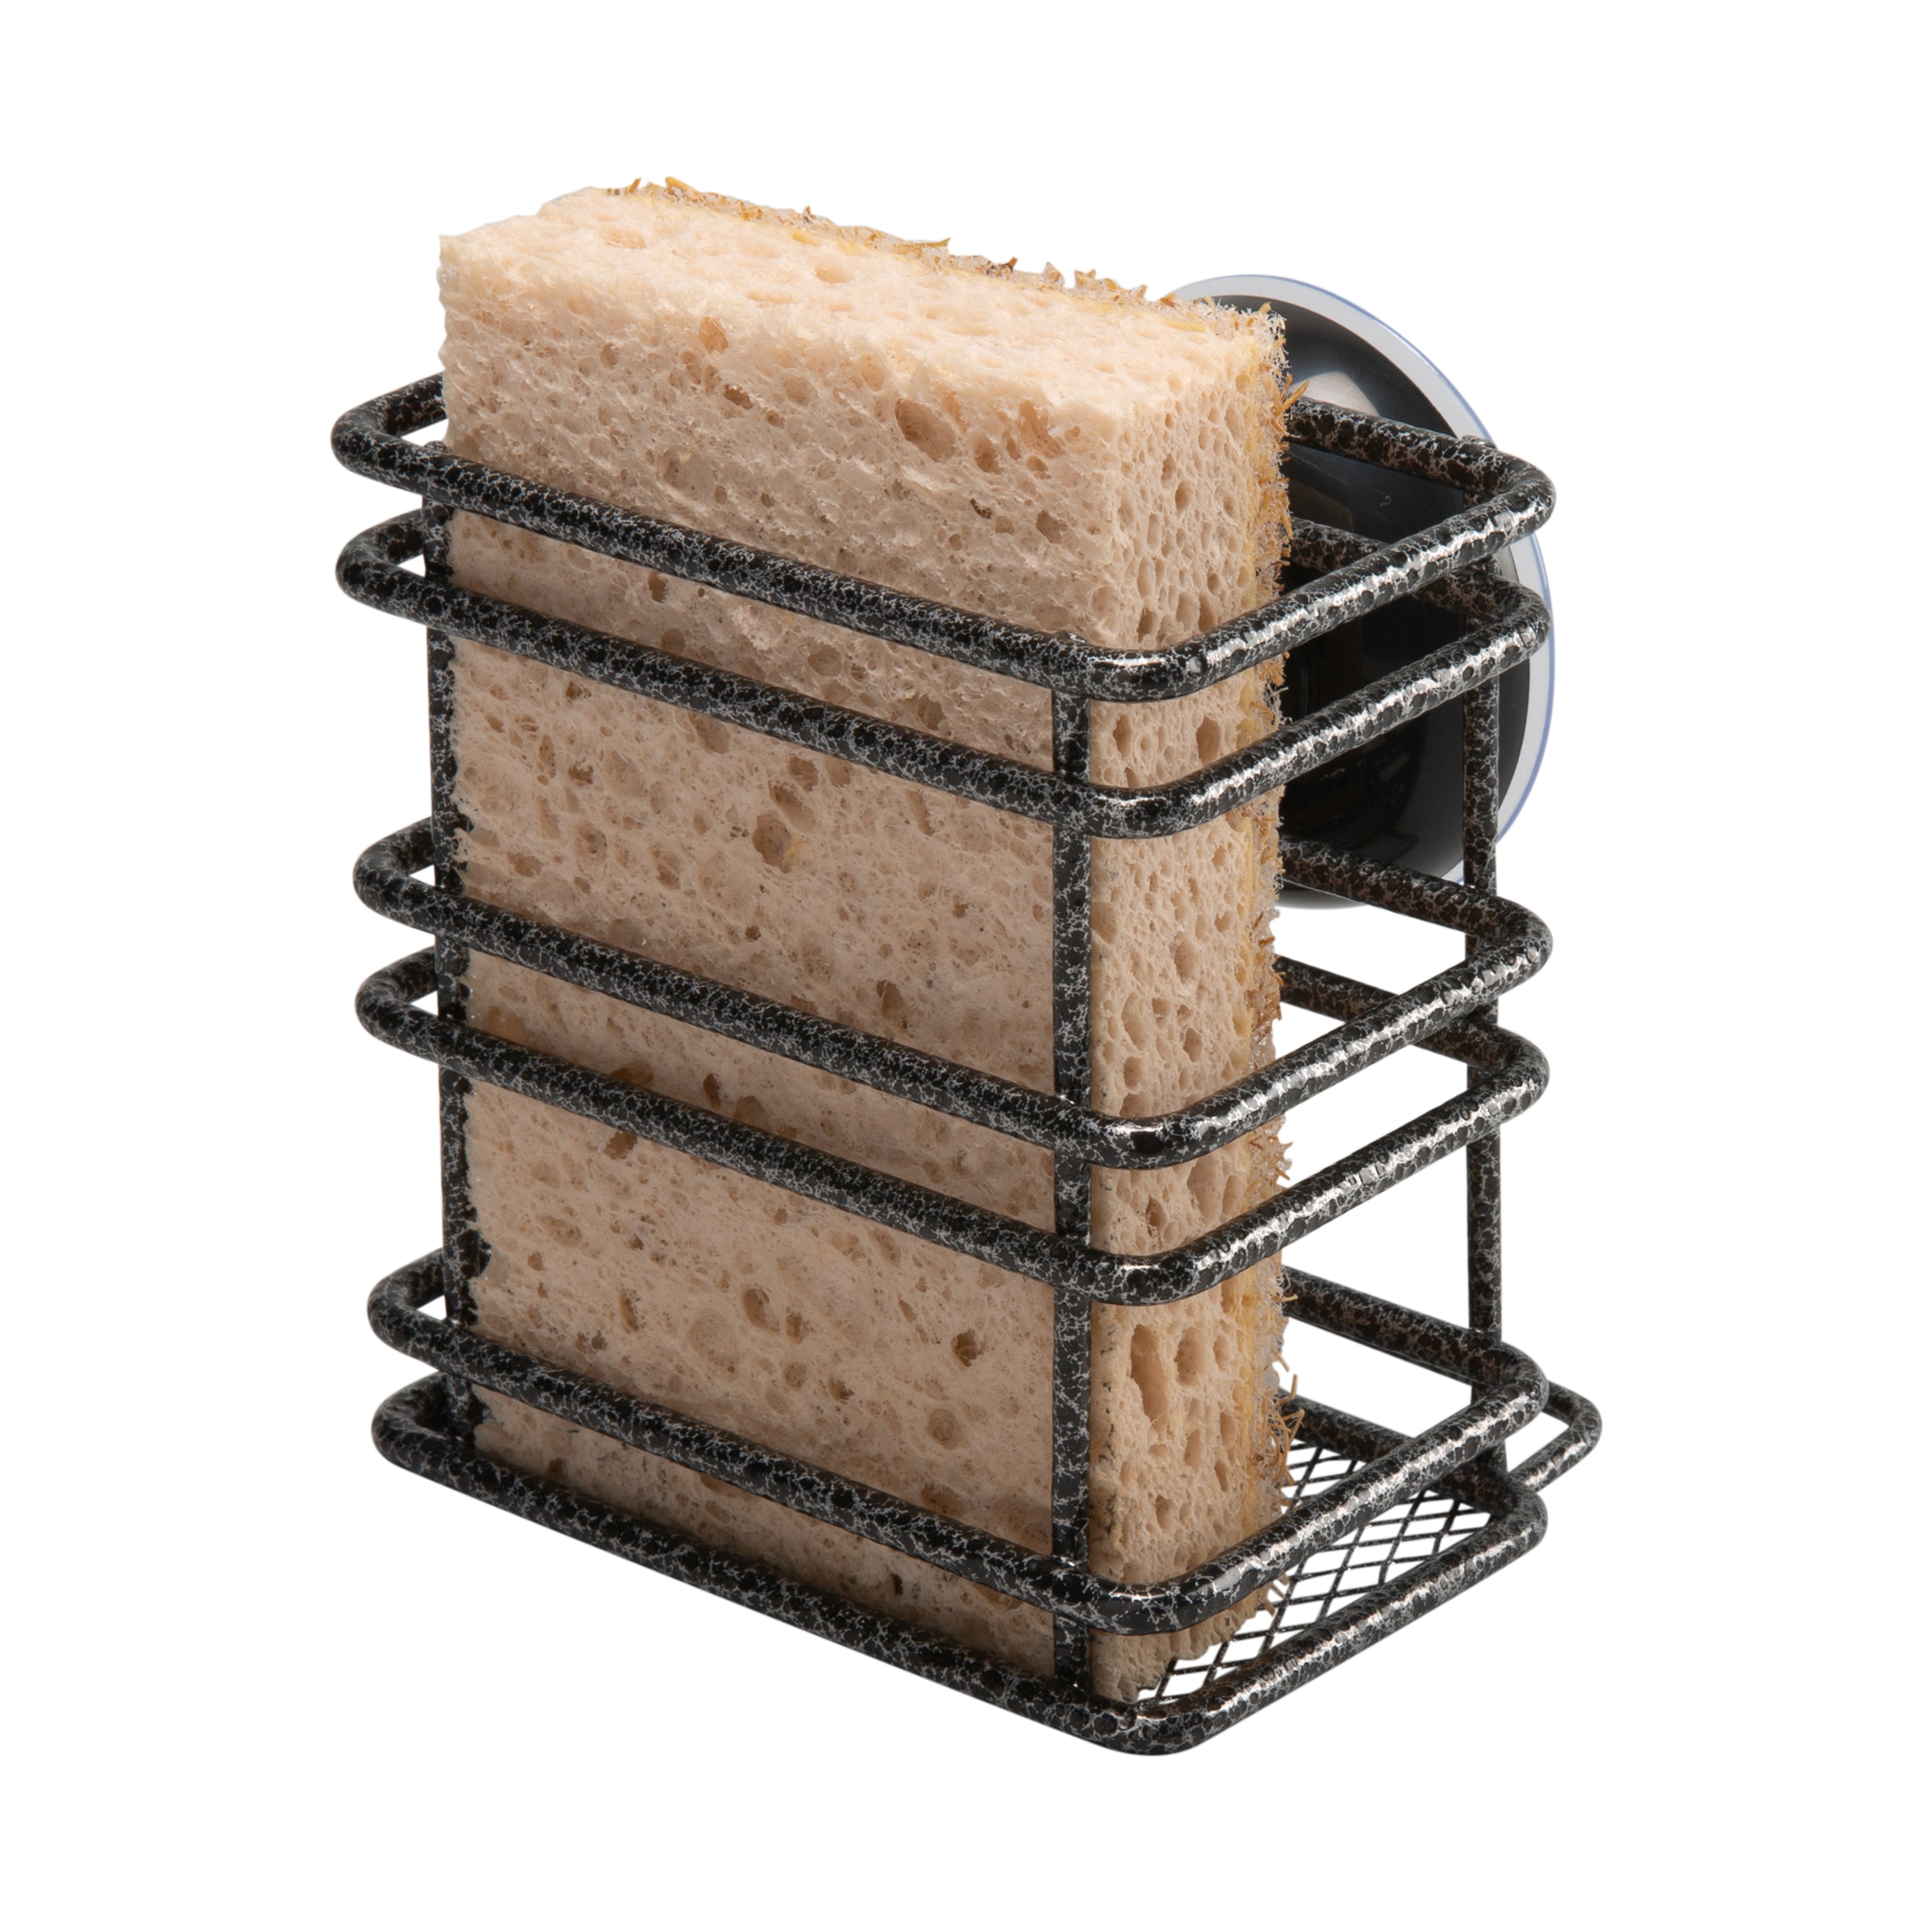 Farmhouse Sponge Holder for Kitchen Sink by Saratoga Home - No-scratch, Rust-Resistant Coated Galvanized Steel with Rustic Wooden Accent, Caddy Fits 2